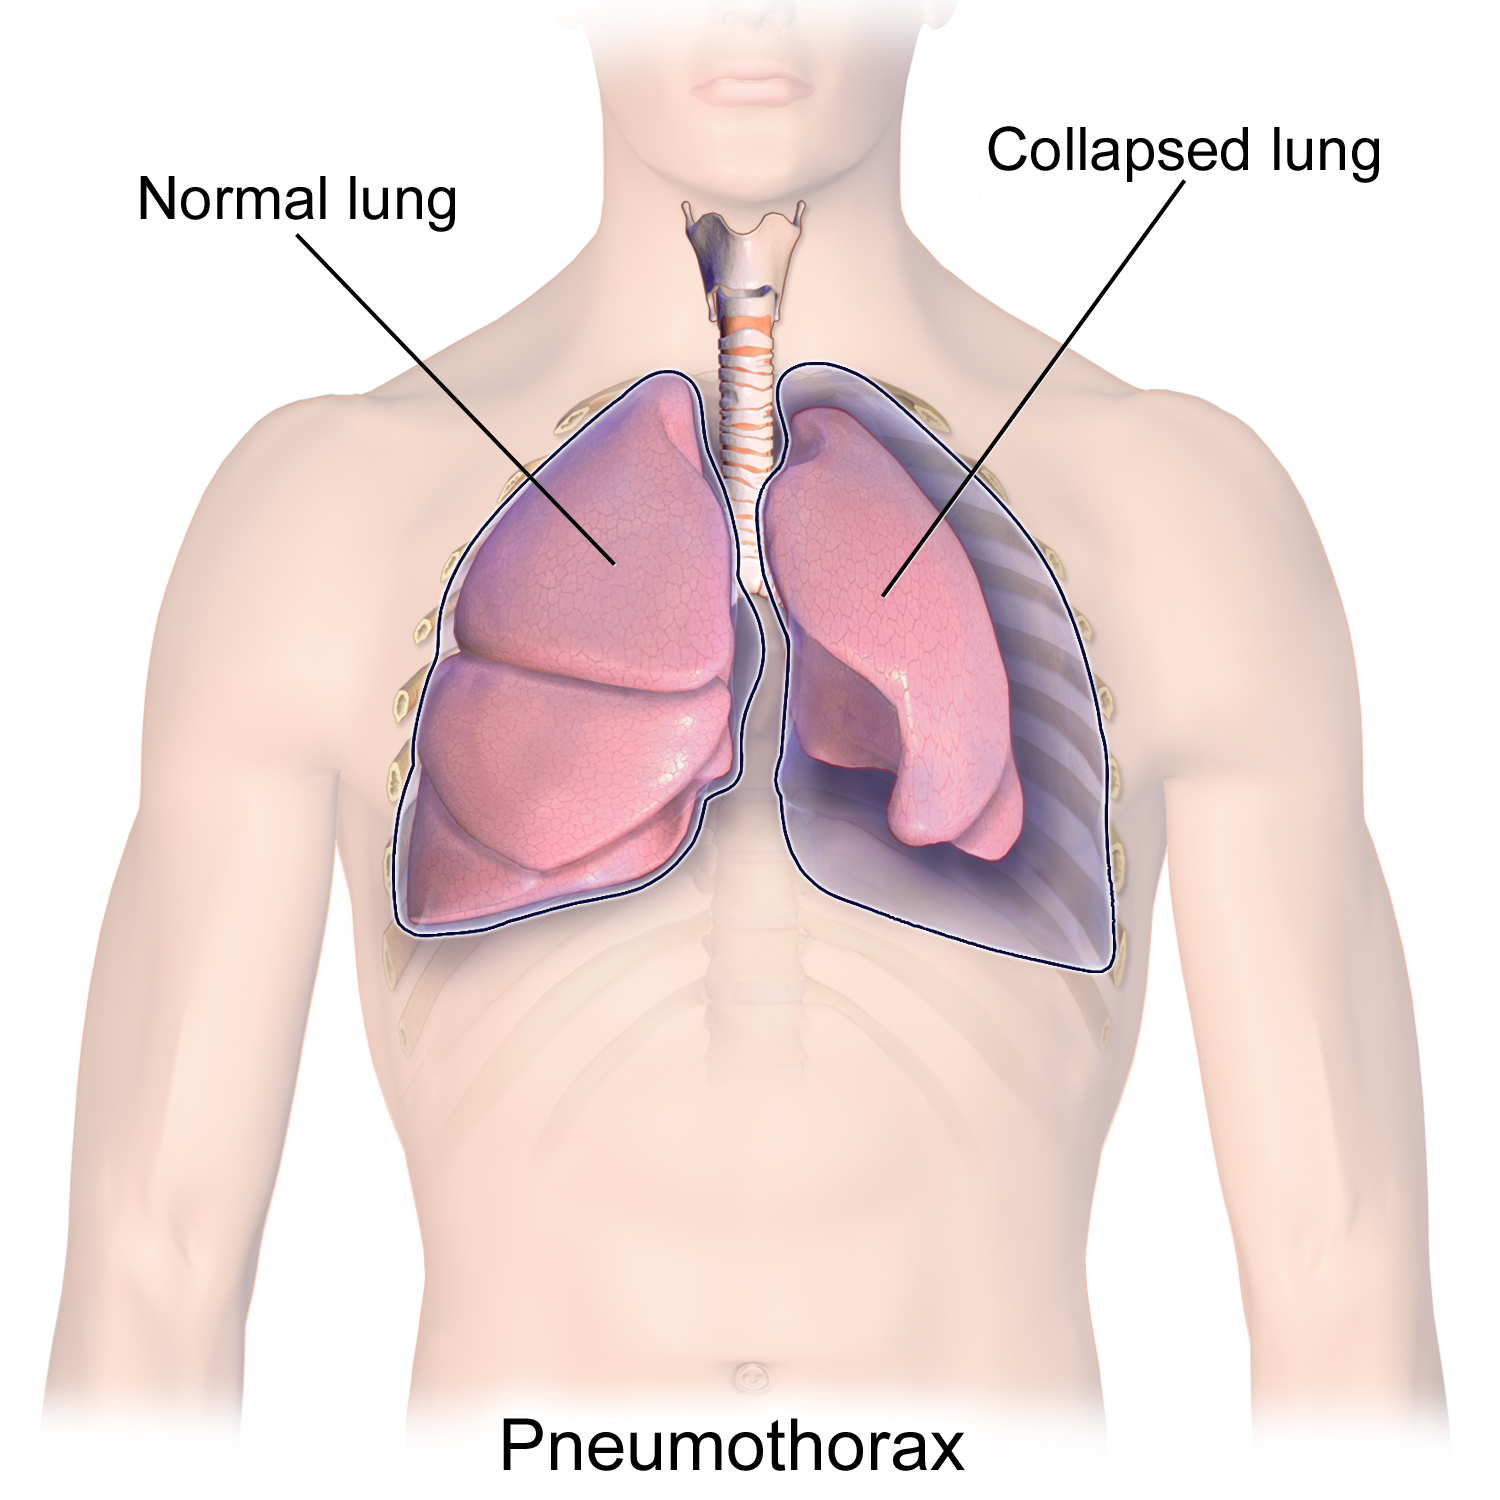 A pneumothorax refers to the introduction of free air in the thoracic cavity that causes the collapse of the lung parenchyma (source)